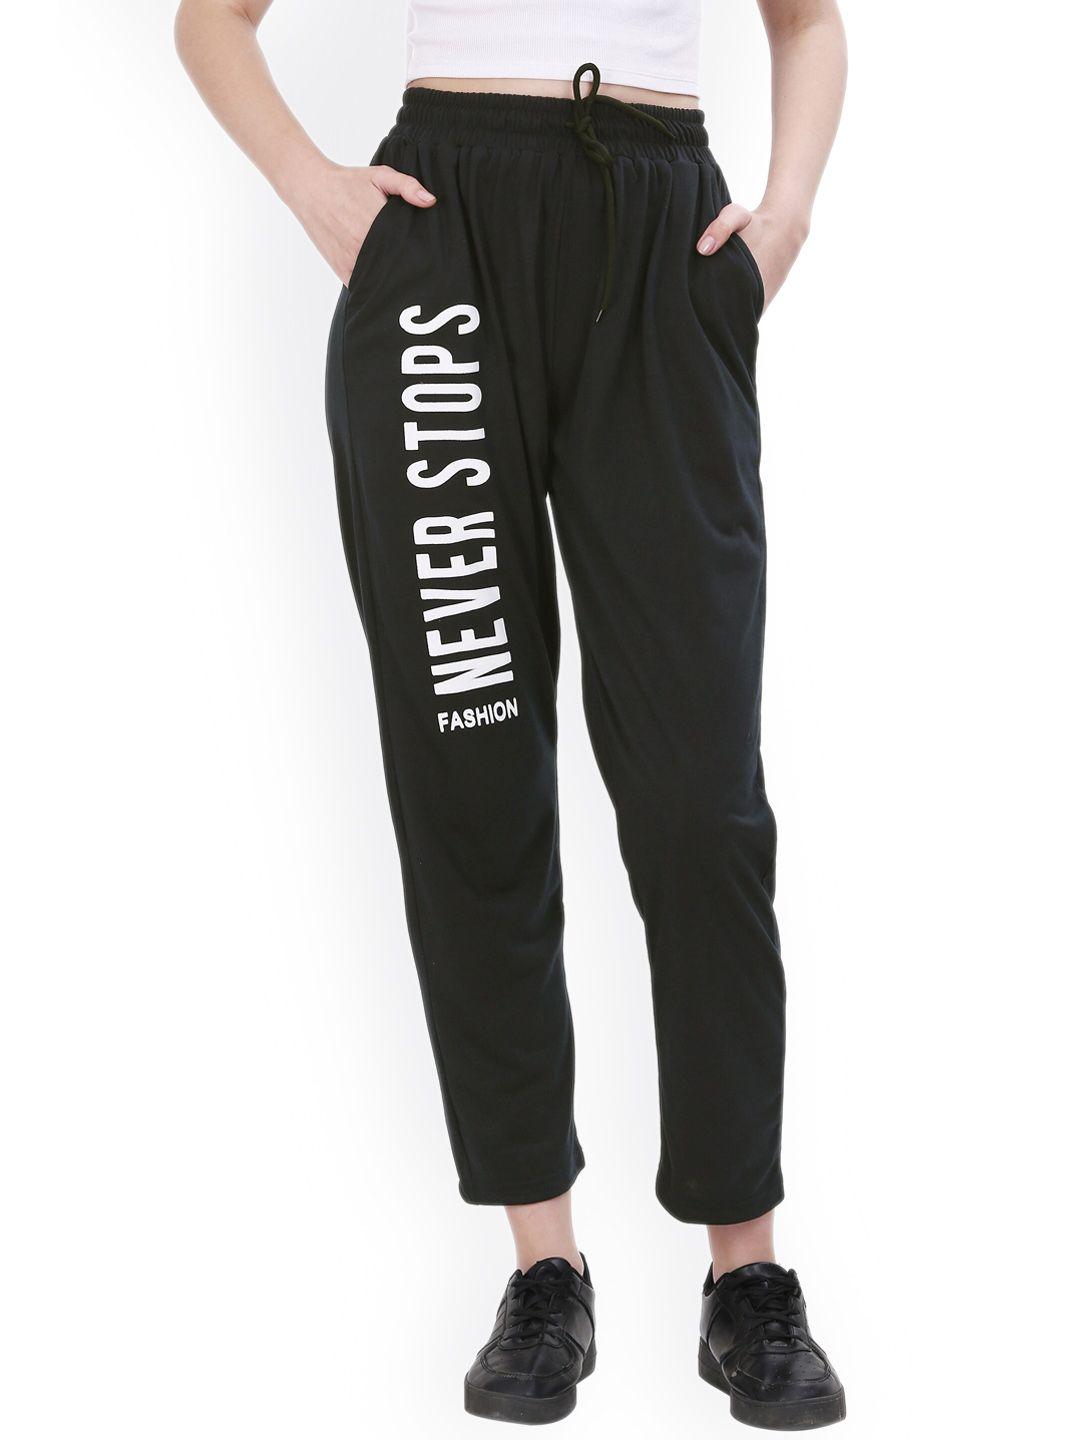 fashionable women typography printed cotton track pants